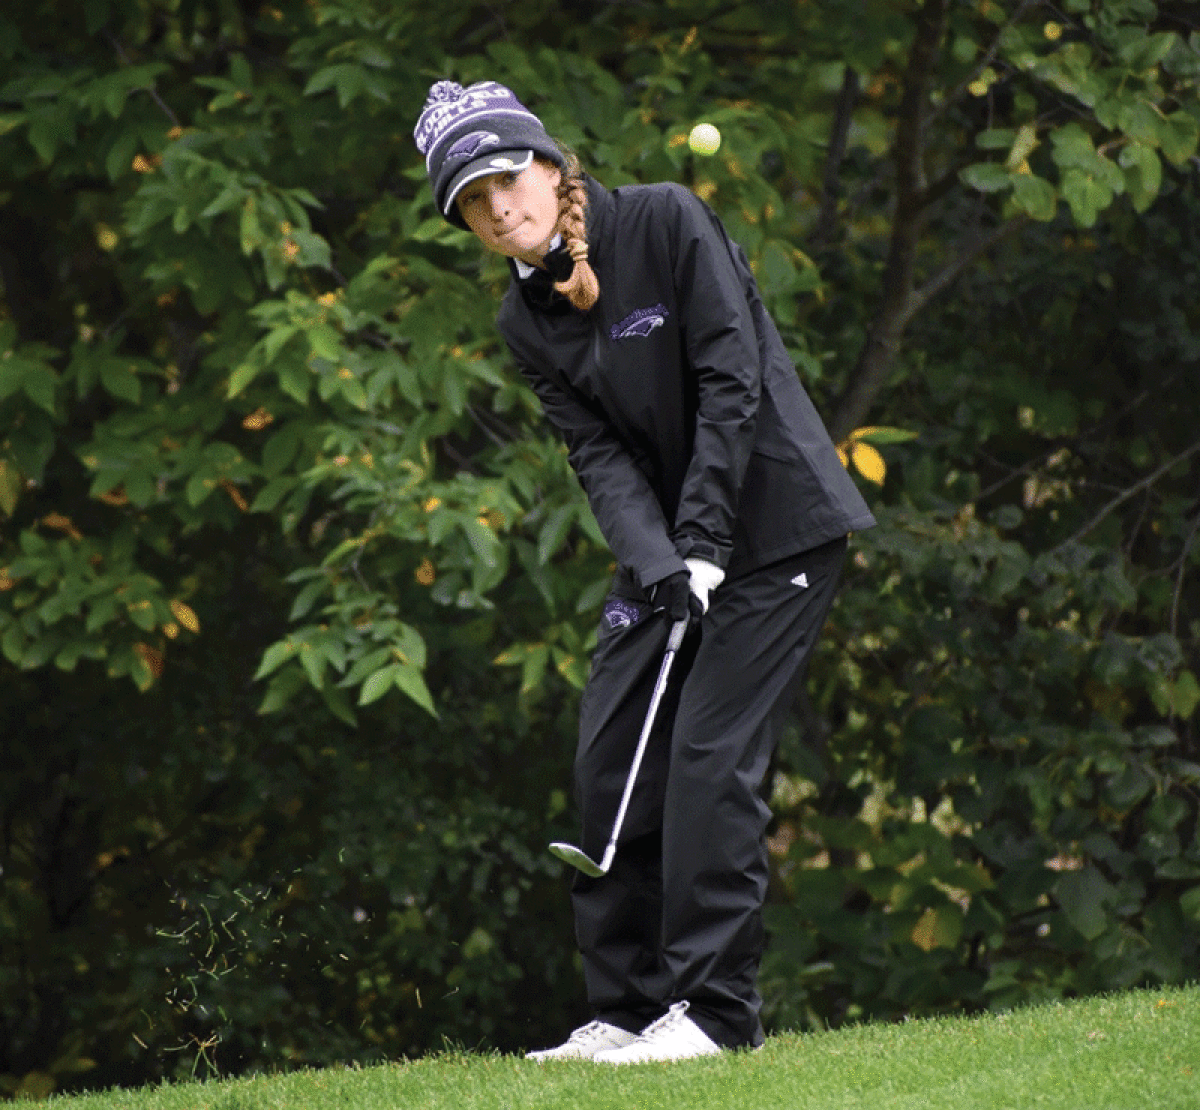  Bloomfield Hills senior Brooke Bugajewski chips during her round at Bedford Valley at the Michigan High School Athletic Association Division One State Finals. 